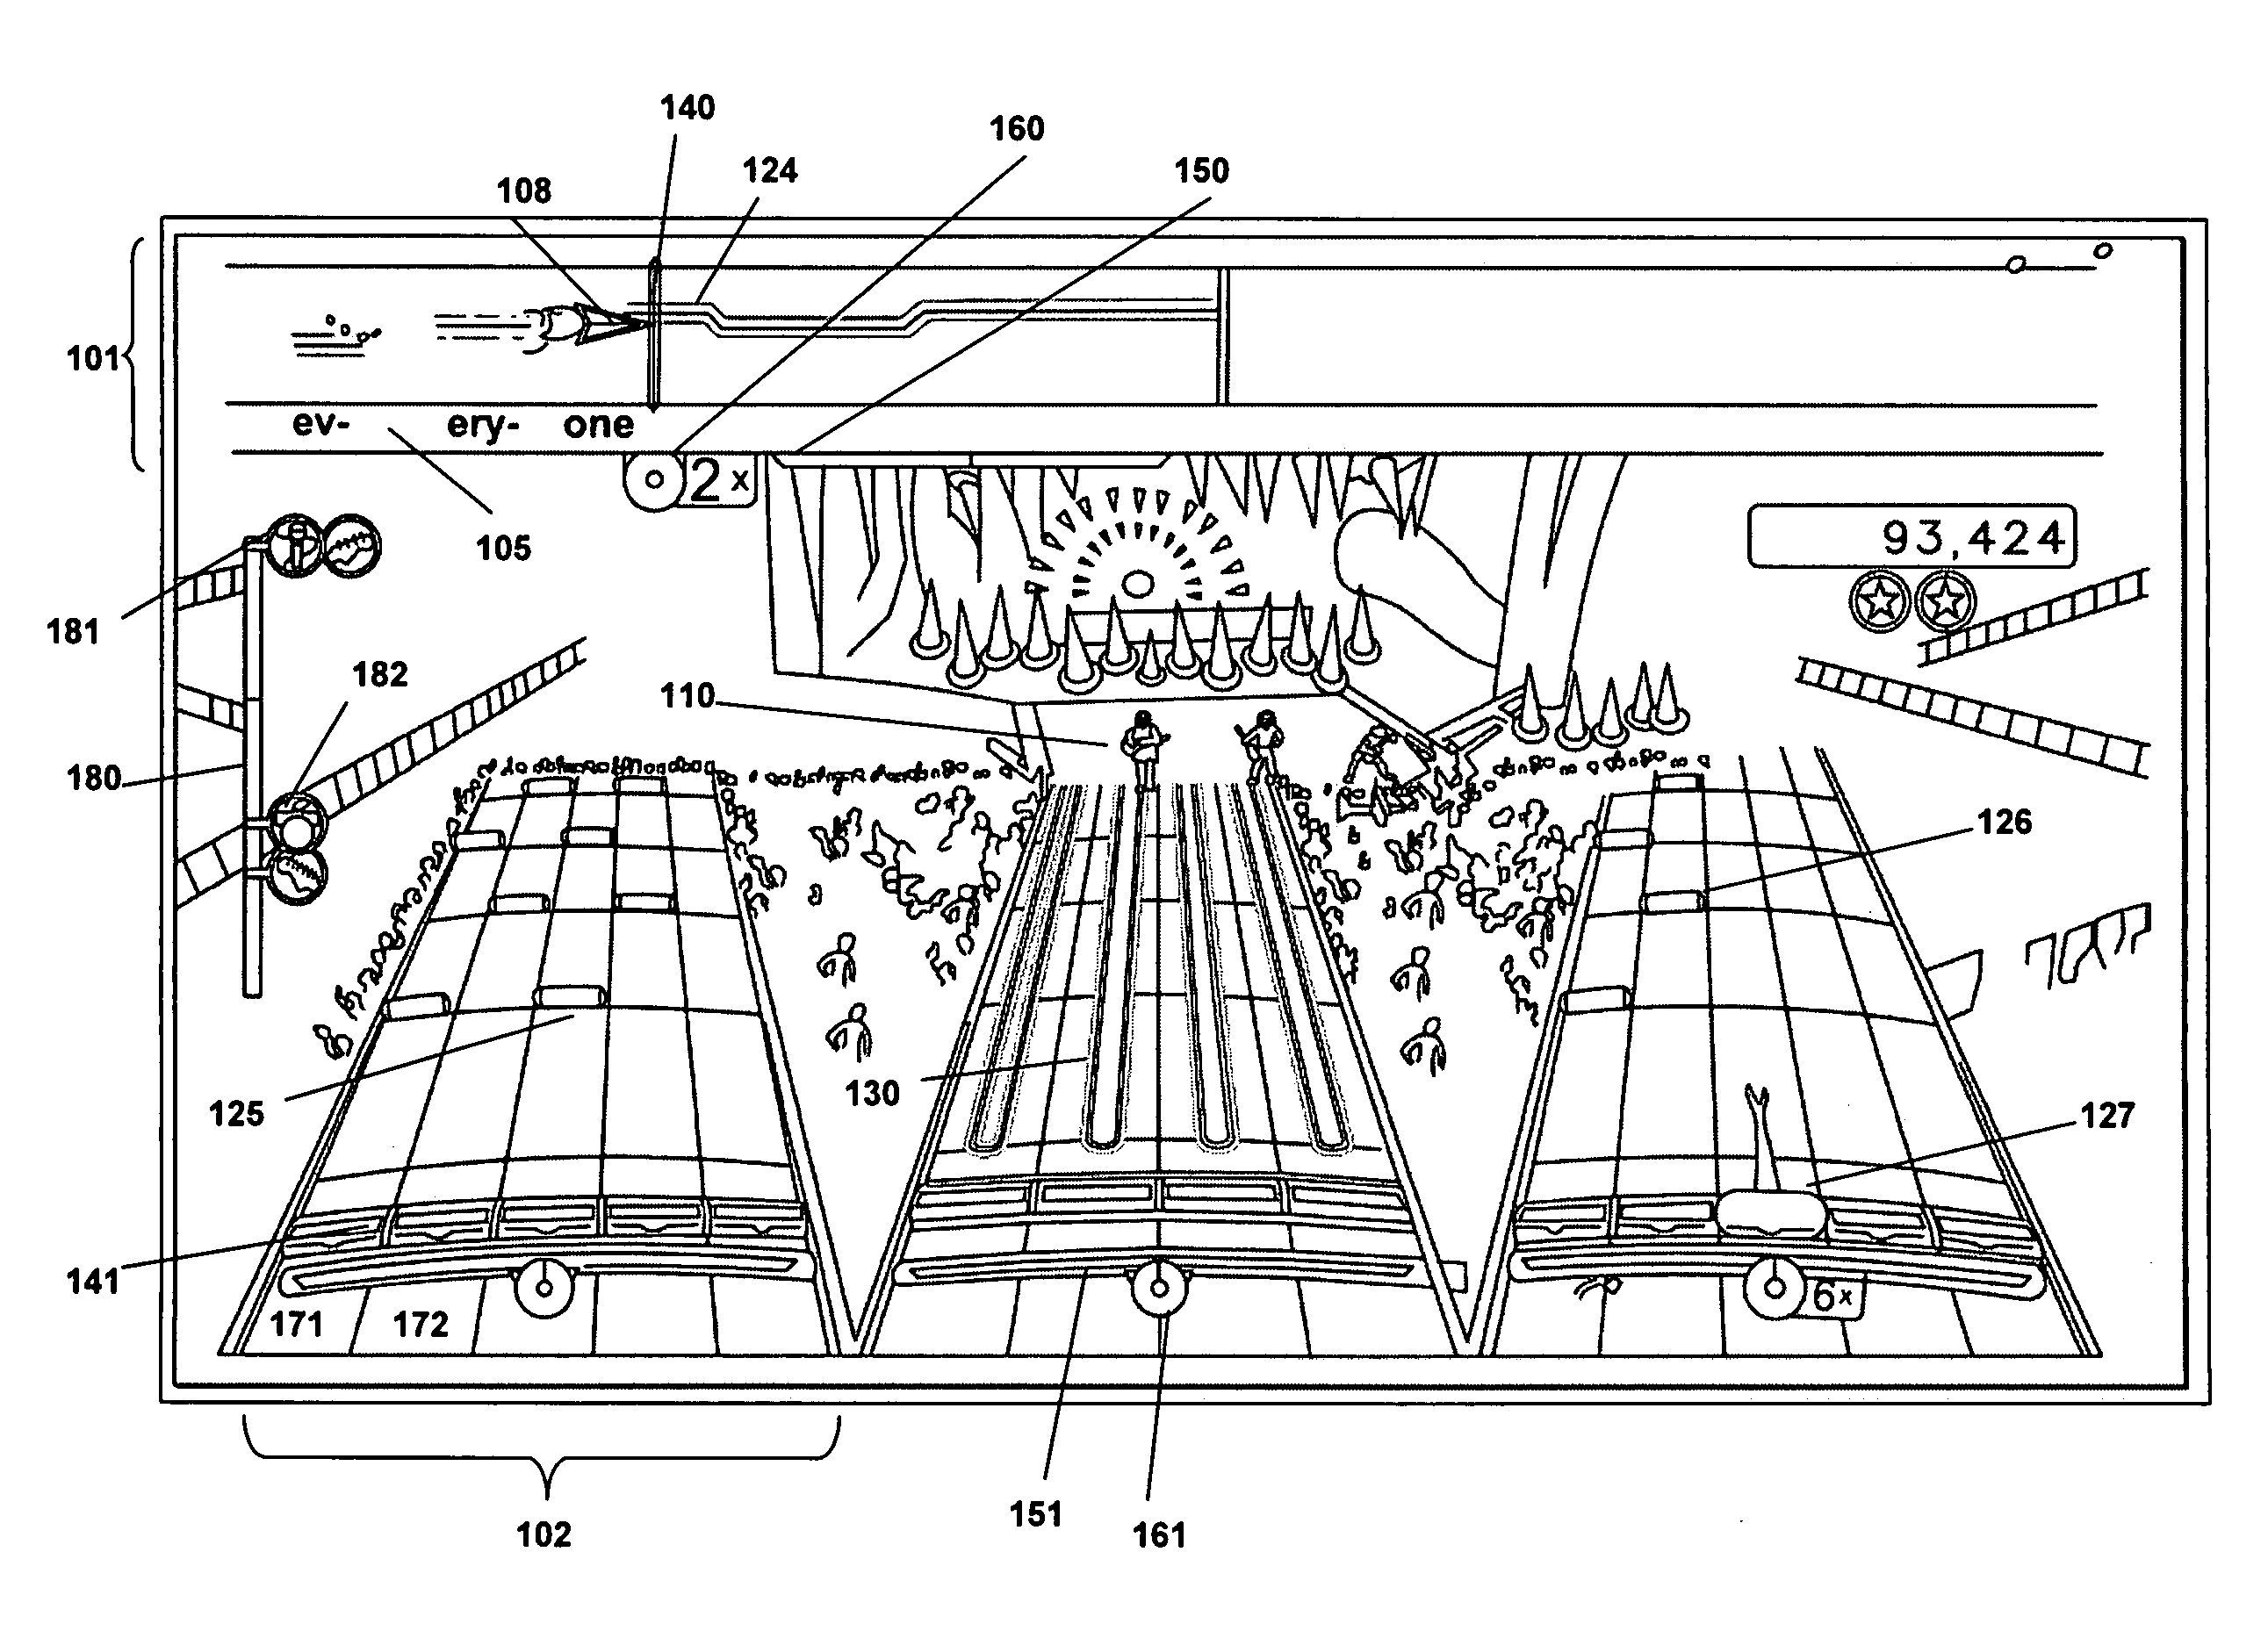 Systems and methods for providing a vocal experience for a player of a rhythm action game